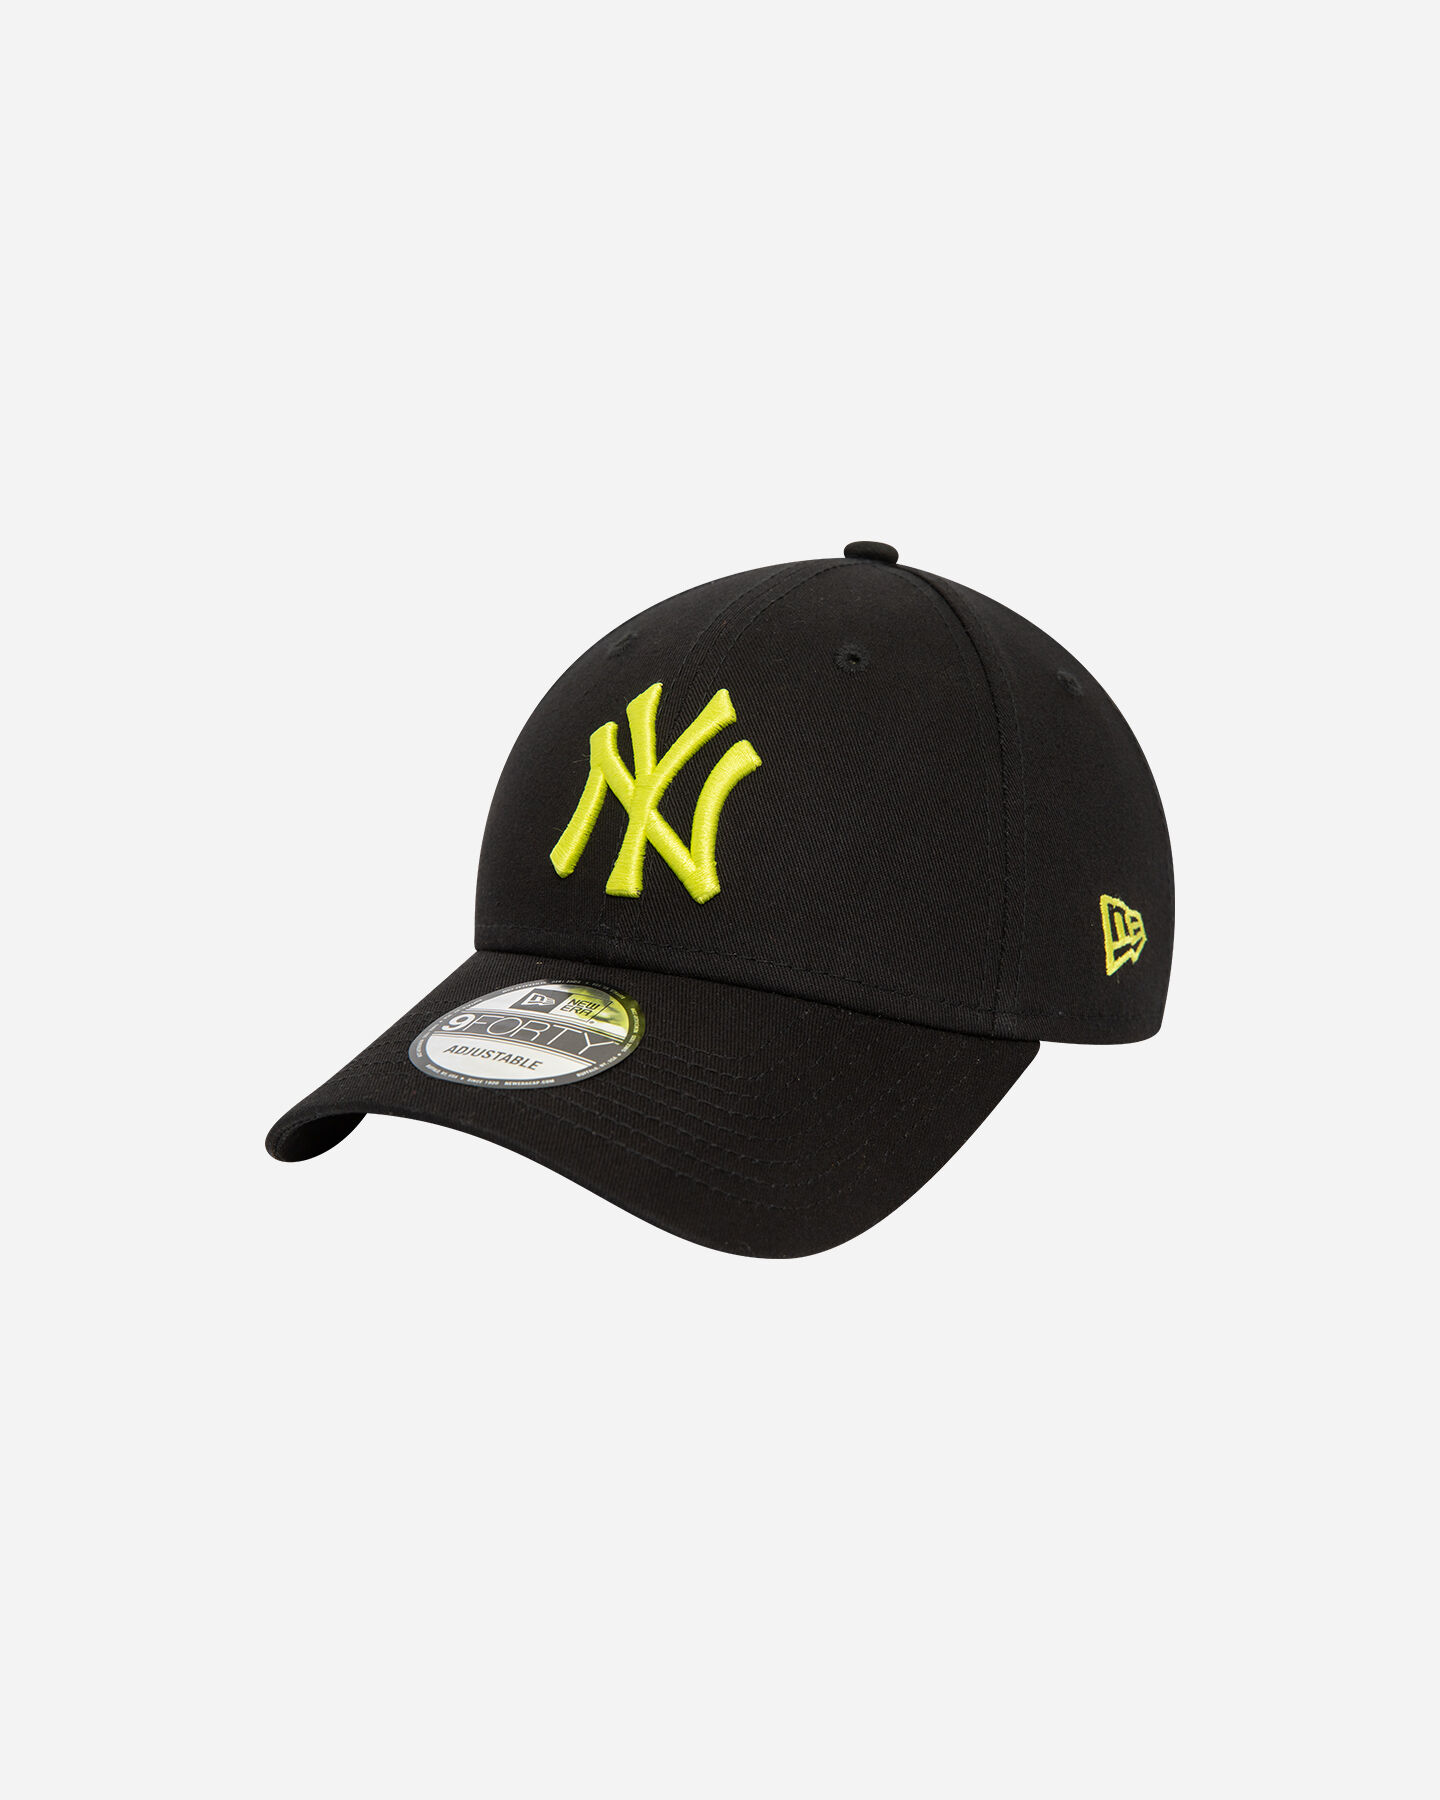  Cappellino NEW ERA 9FORTY MLB LEAGUE ESSENTIAL NEW YORK YANKEES M S5671048|001|OSFM scatto 0